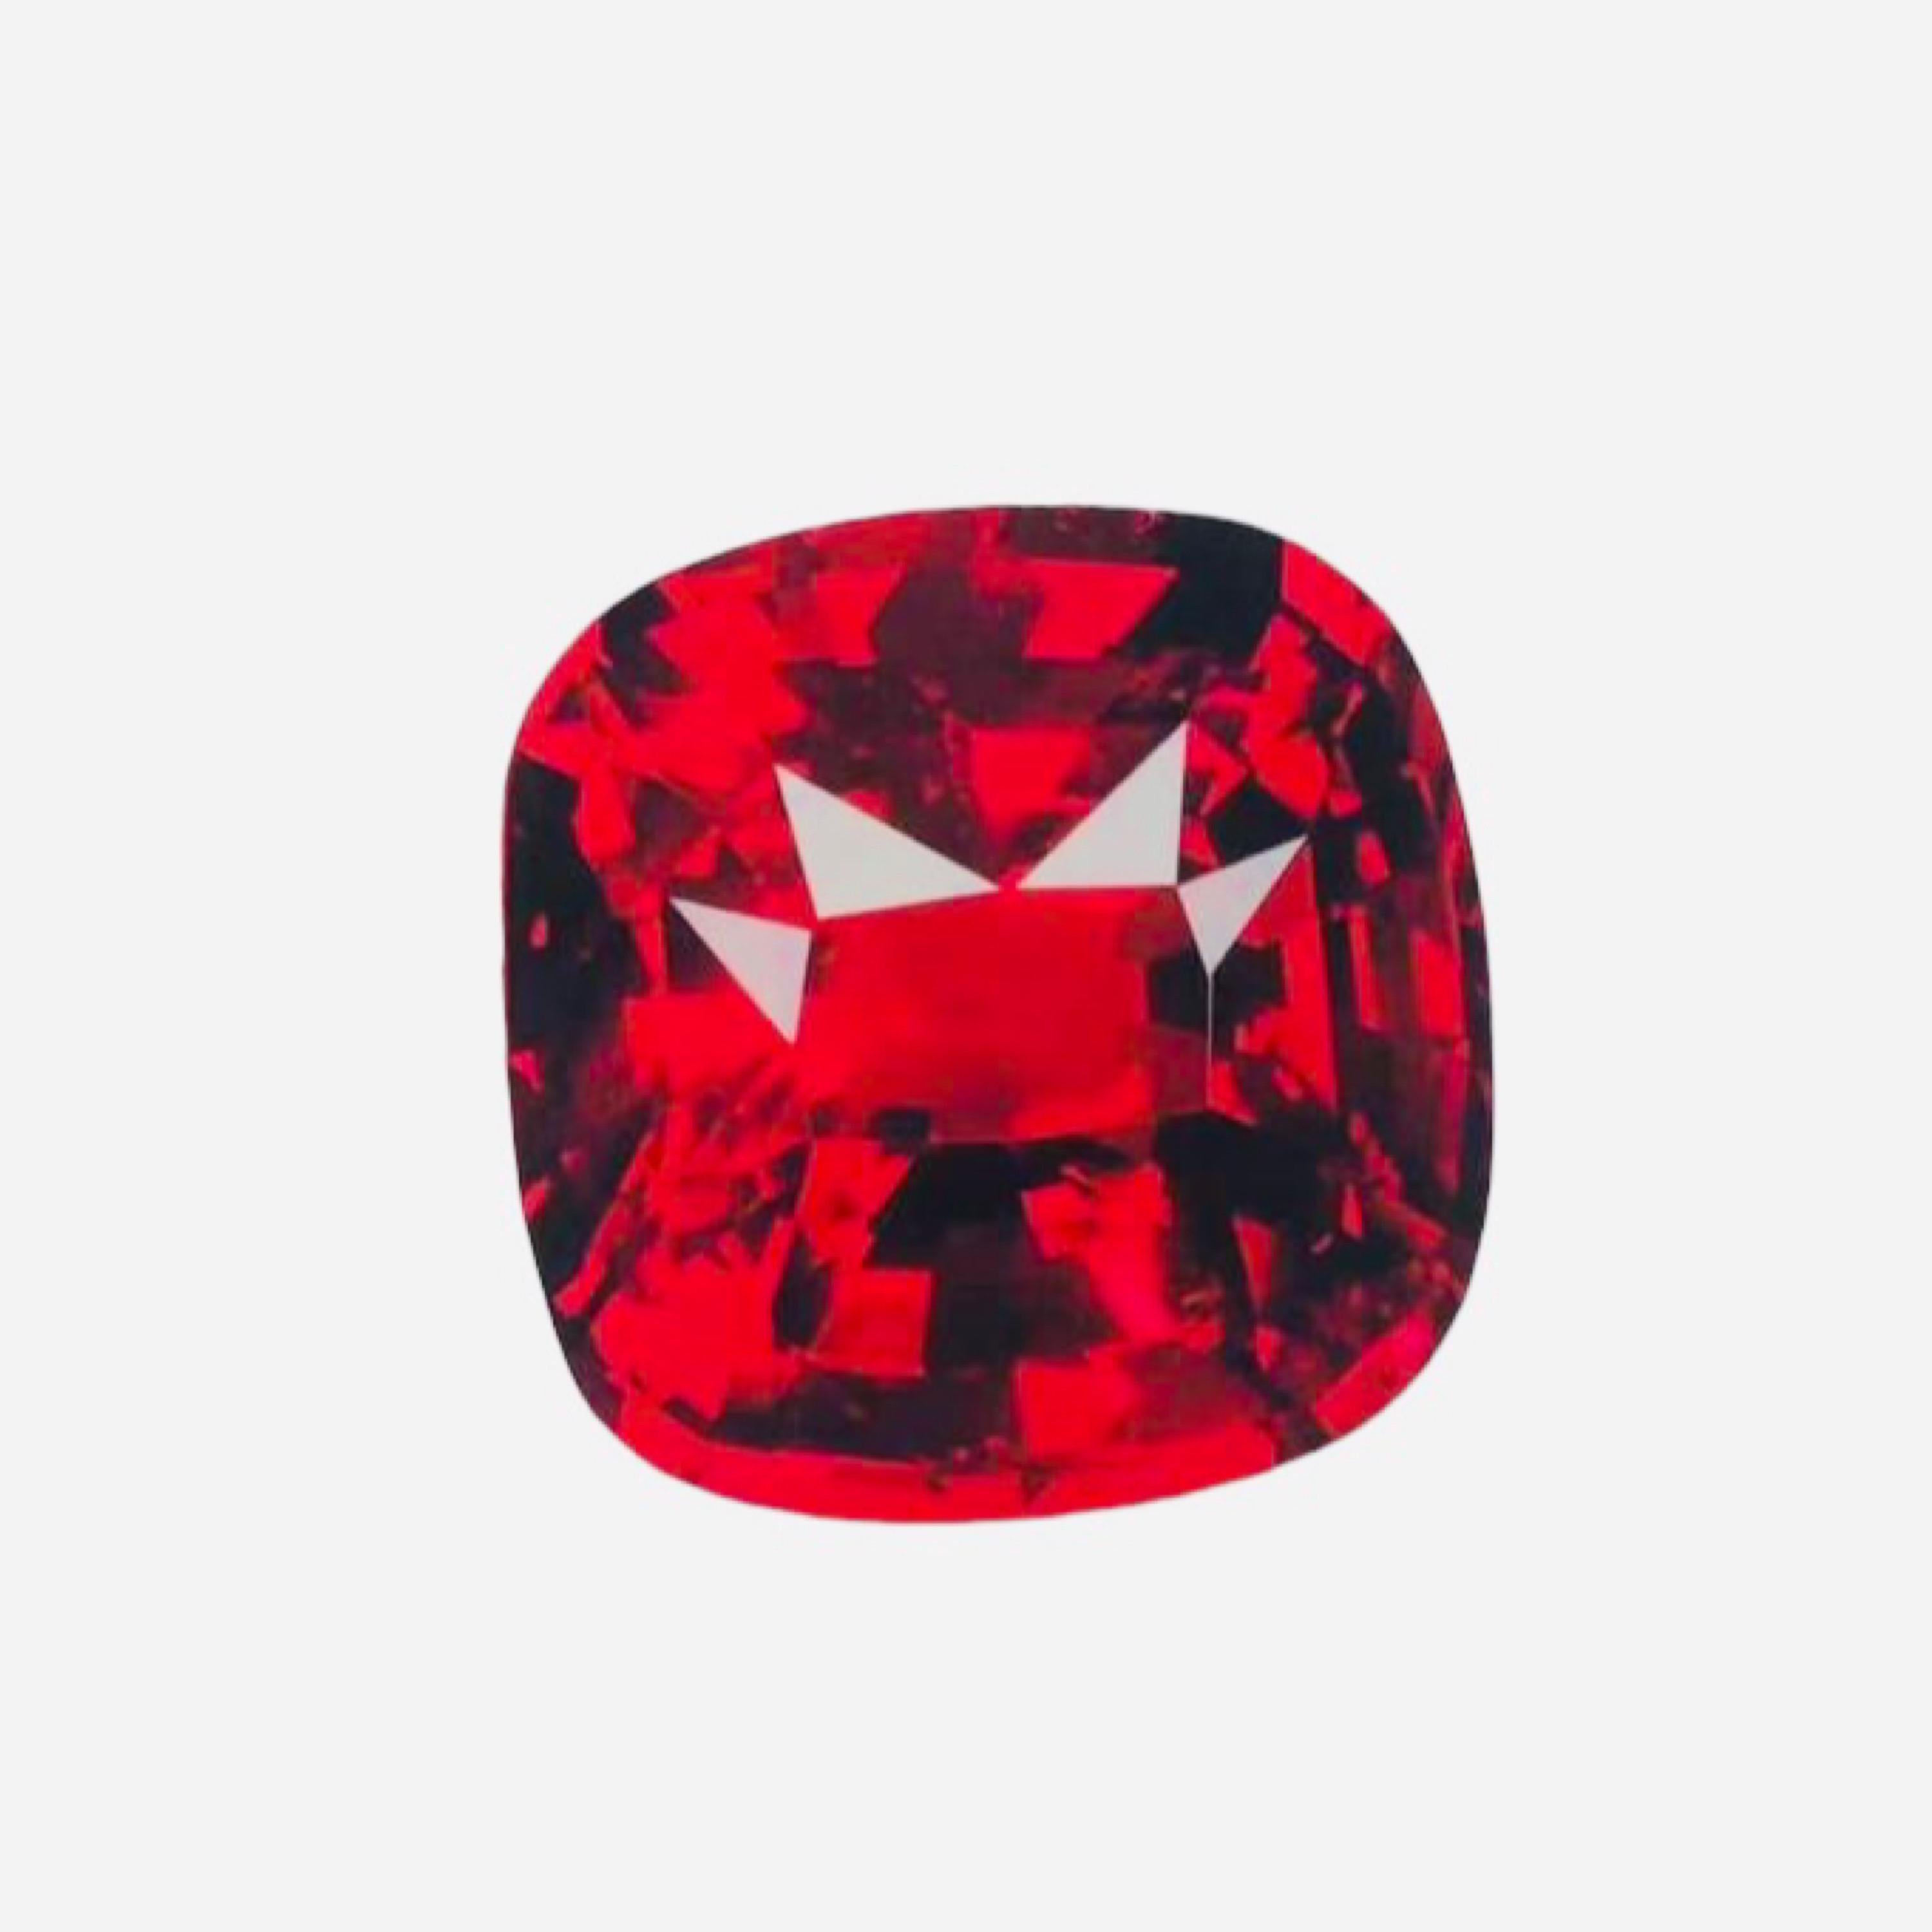 From Emilio Jewelry, a well known and respected wholesaler/dealer located on New York’s iconic Fifth Avenue, 
This ruby is only for whom expects the very BEST OF THE BEST and nothing less! We own similar Rubies which are far less pricey, however